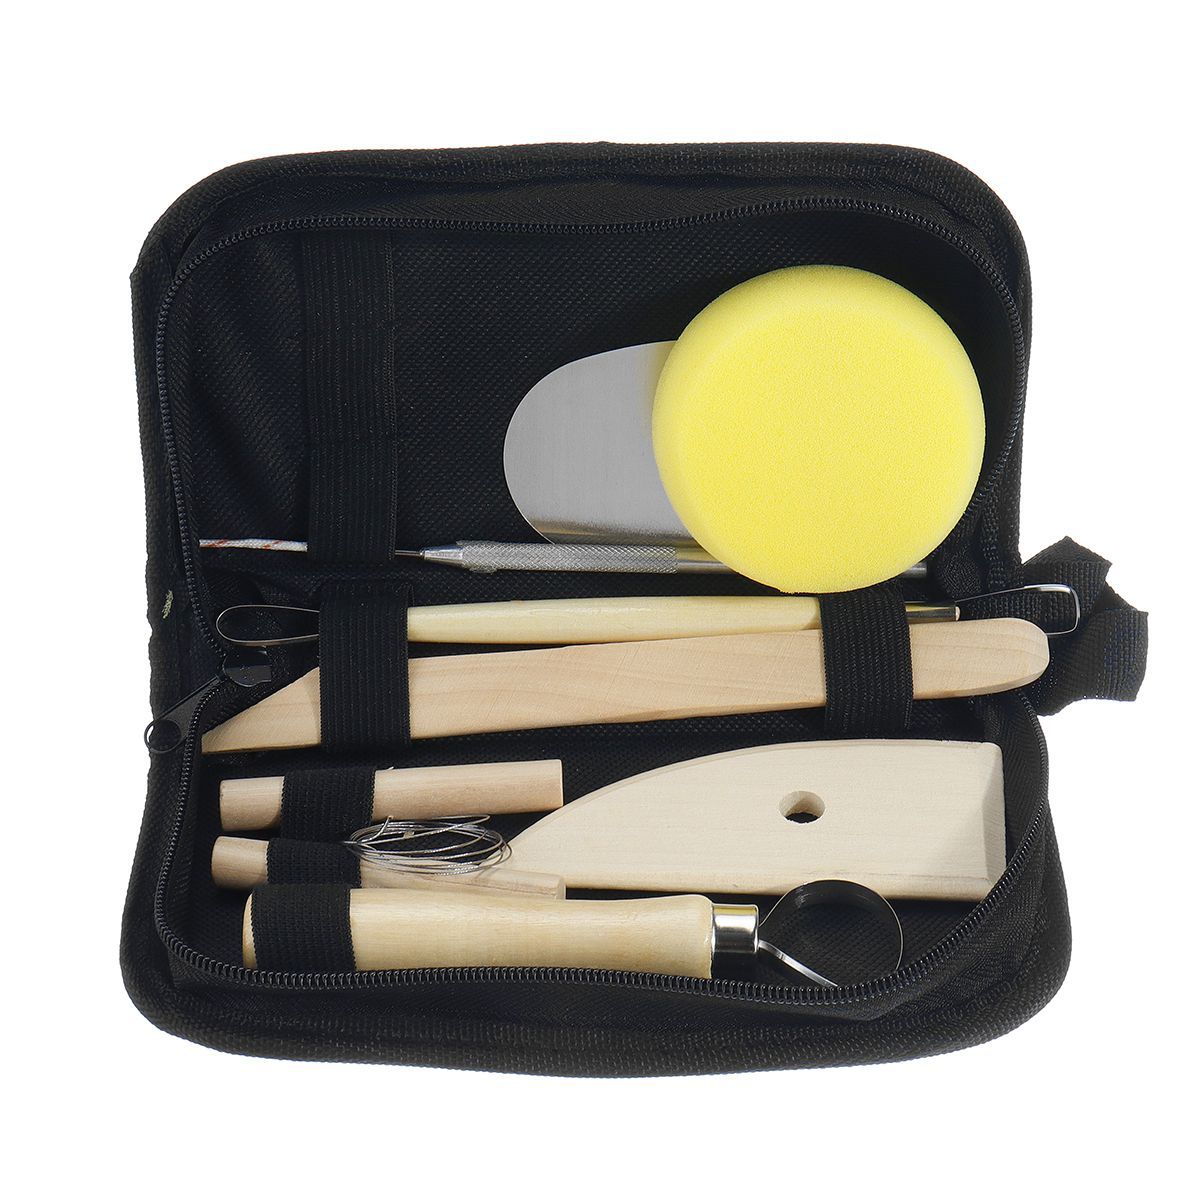 8PCS-Clay-Sculpting-Wax-Carving-Pottery-Tools-Polymer-Ceramic-Modeling-Kit-1519433